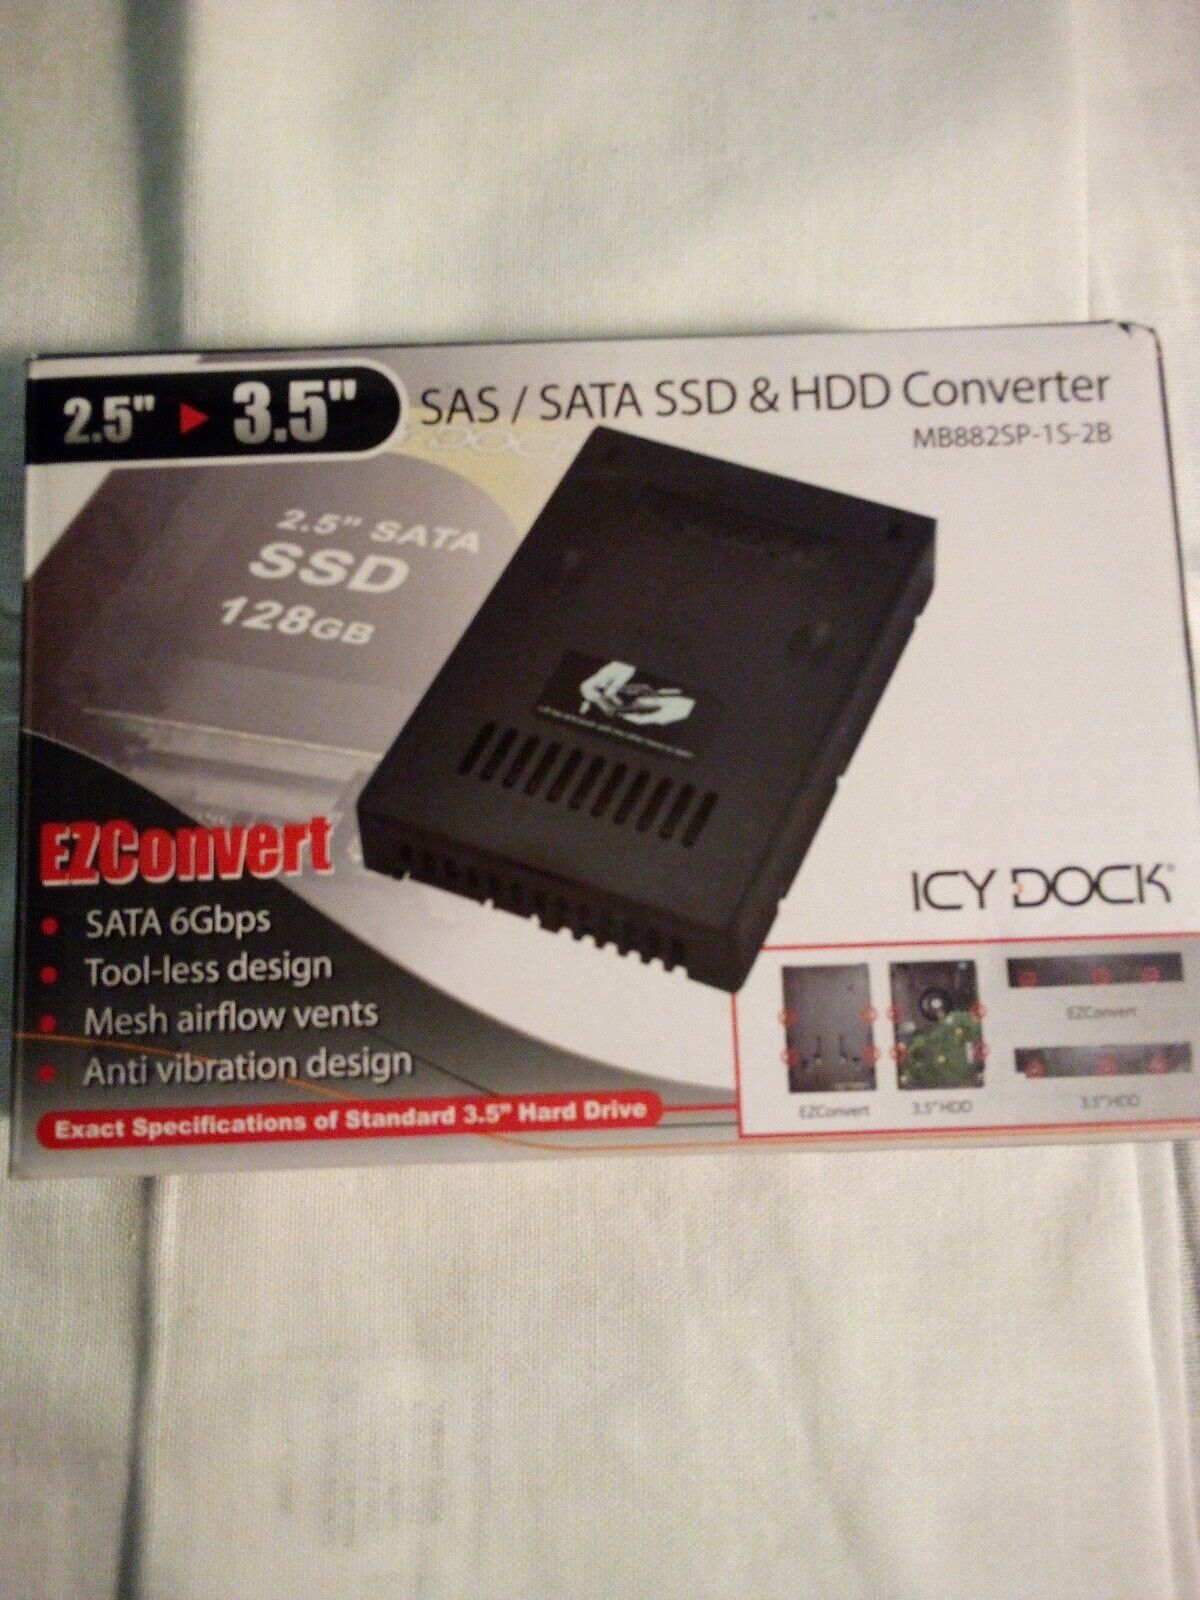 ICY DOCK MB882SP-1S-2B 2.5 to 3.5inch SSD SATA Hard Drive Converter Retail